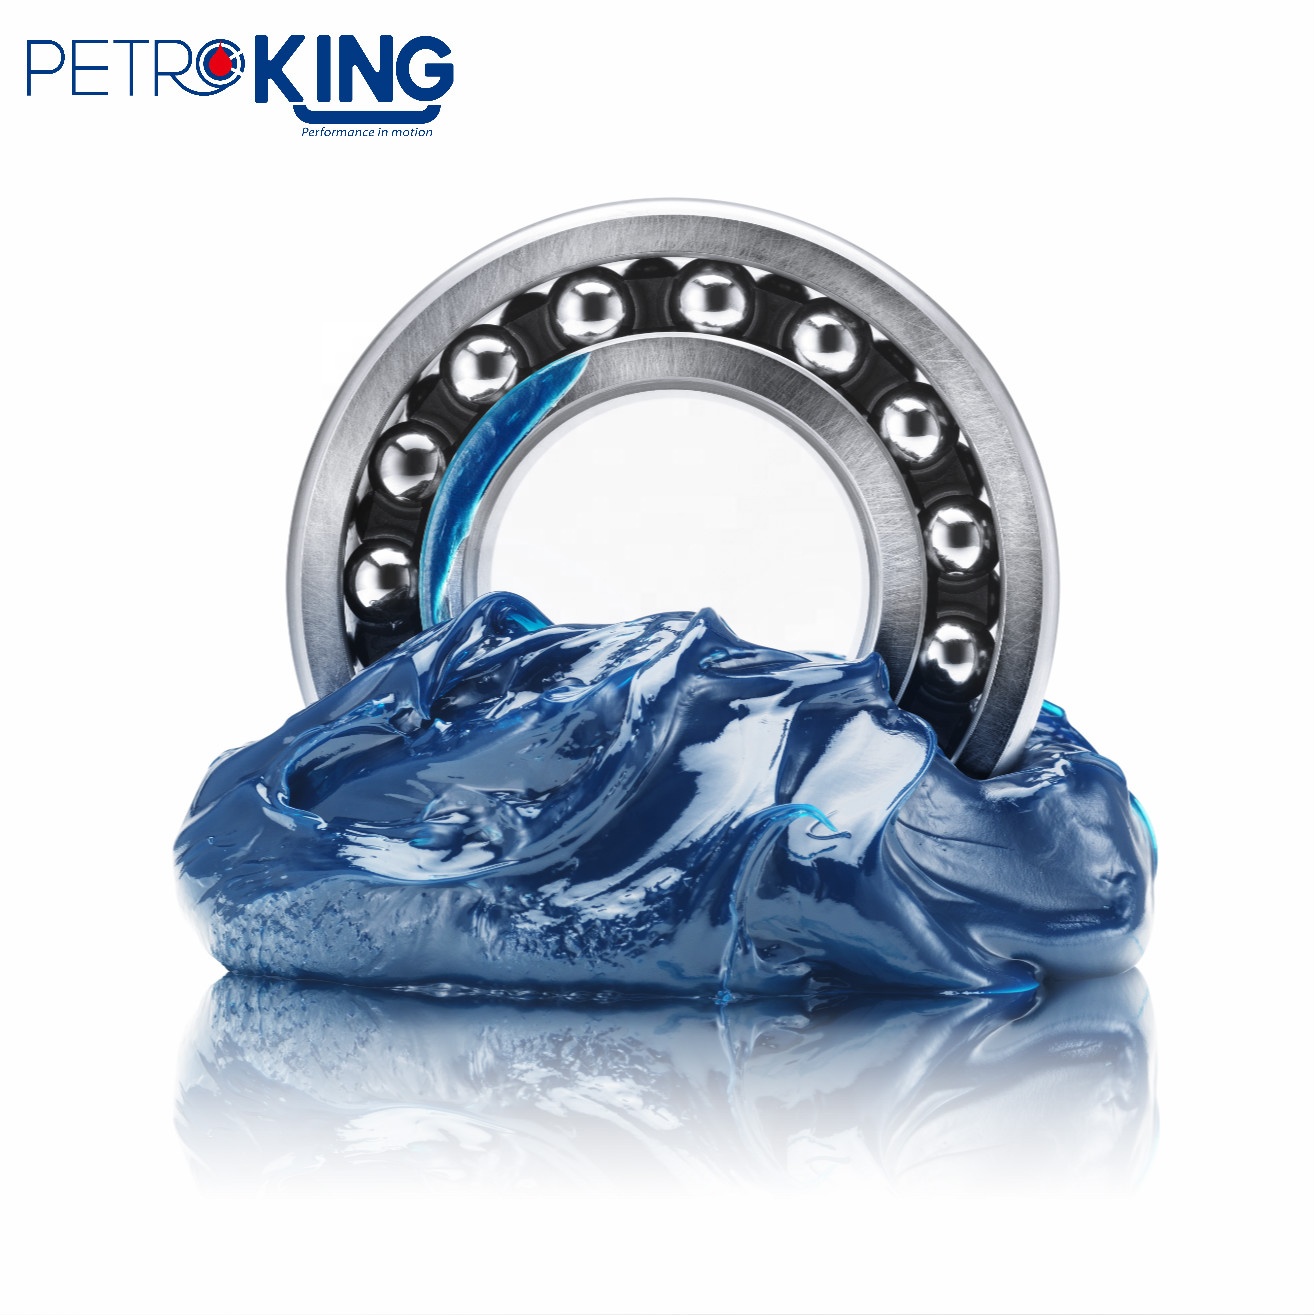 OEM/ODM China Greased Lightning Oil Additive - Petroking High Quality Deep Groove Ball Bearing – PETROKING